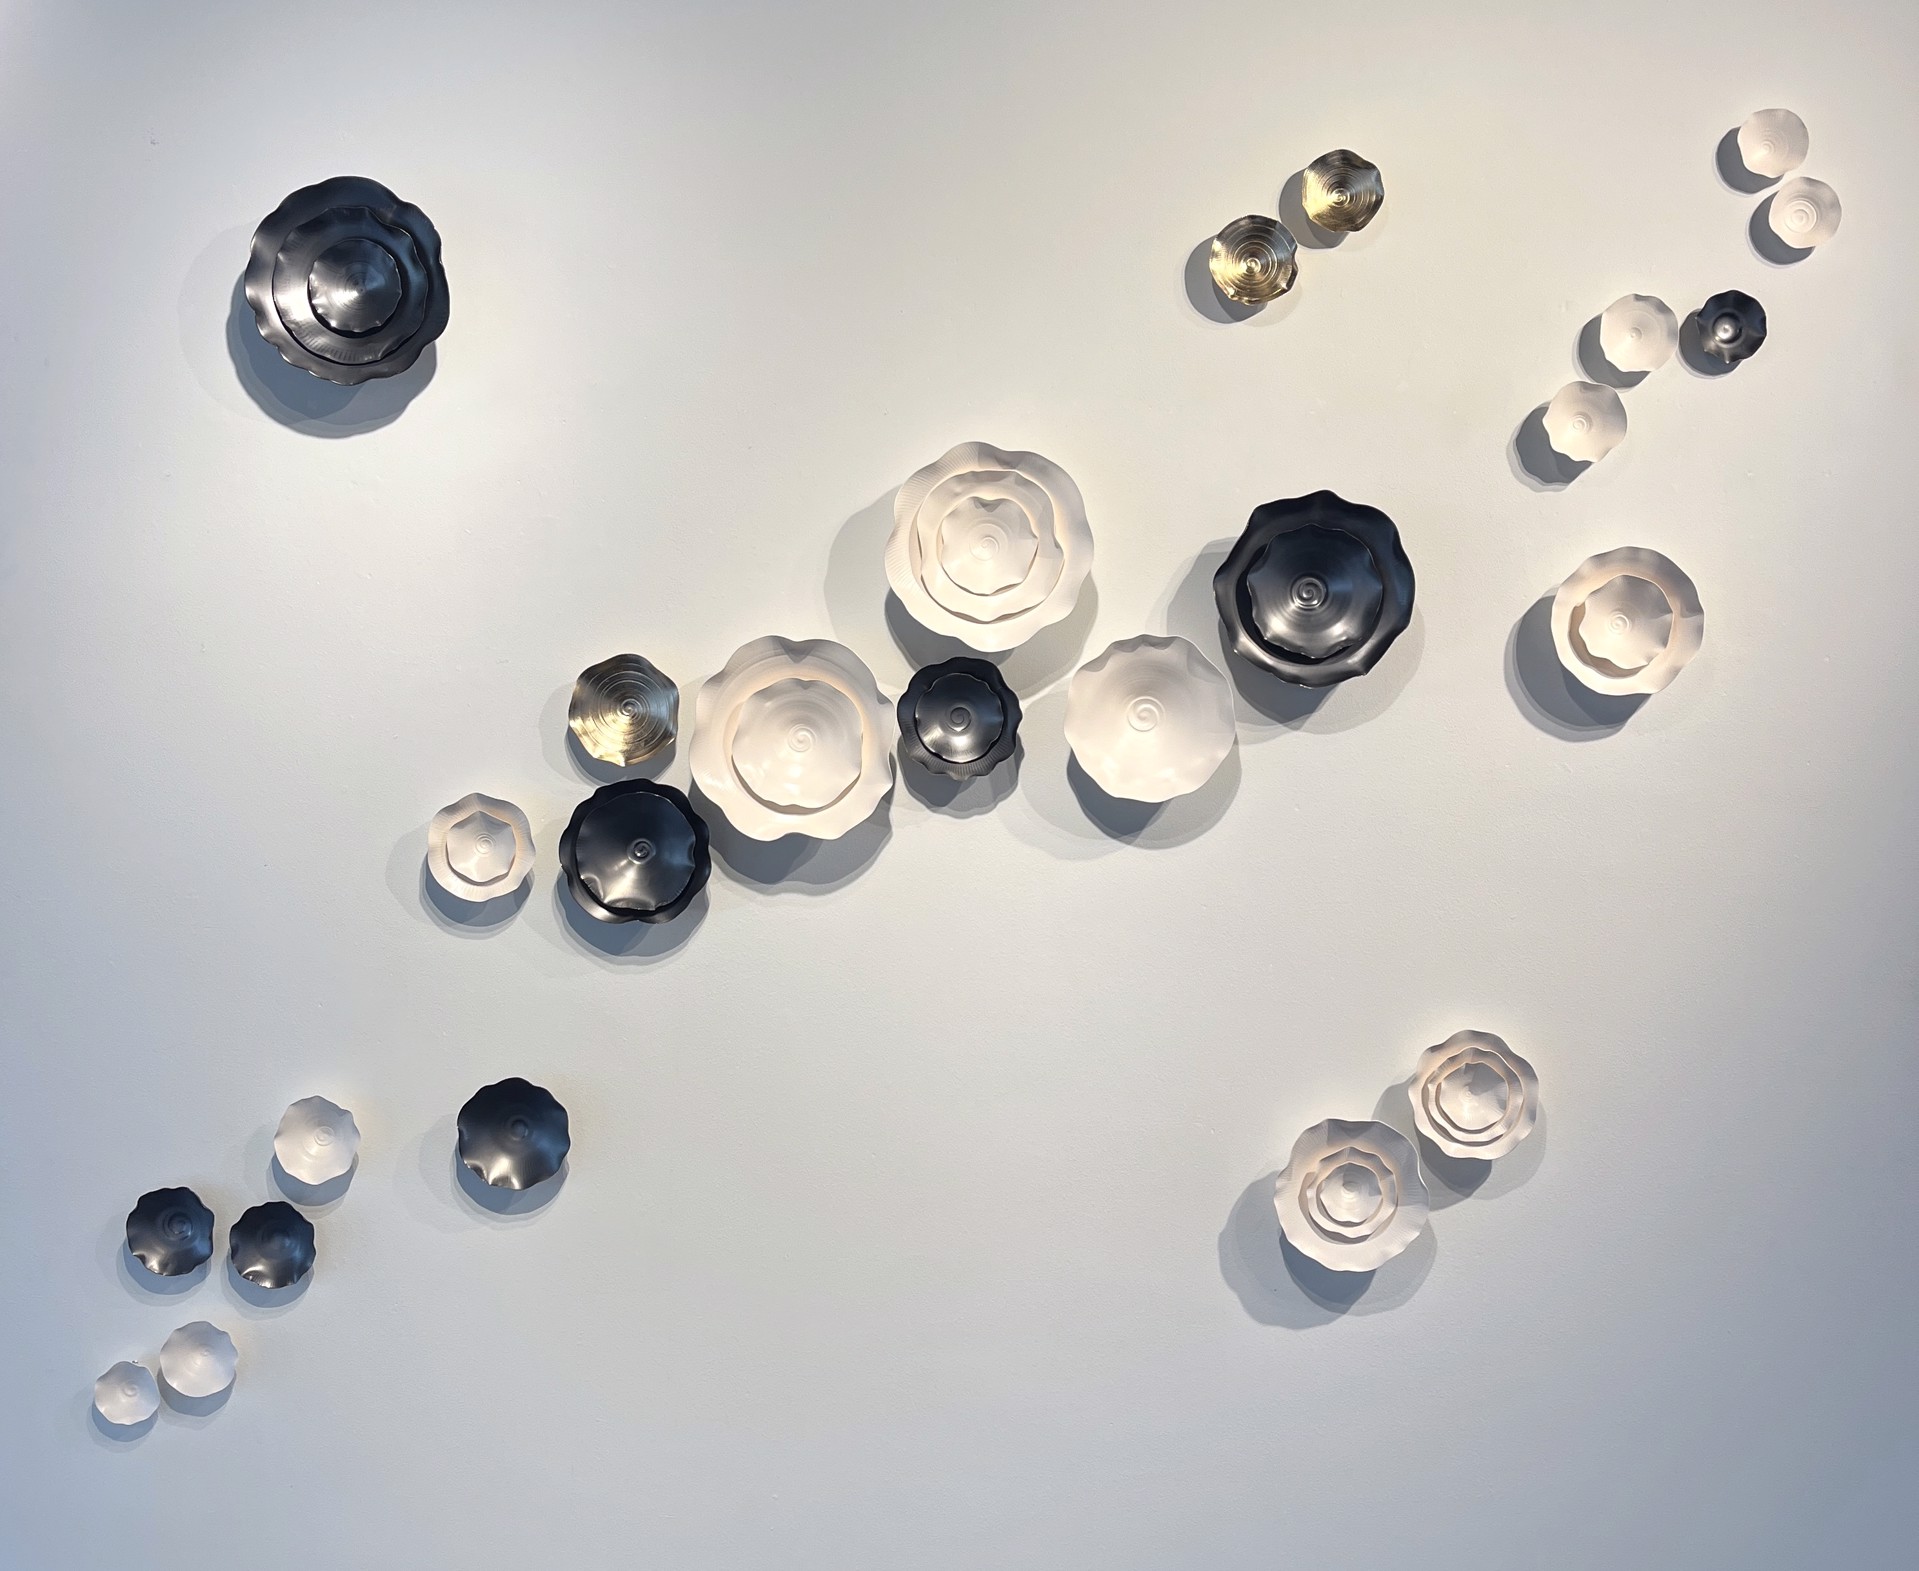 Lucrecia Waggoner Porcelain Wall Installation Custom Artwork Lucrecia Waggoner Intertwined III, 2023 Gunmetal, polished porcelain, and moongold accents5 x 7 ft 